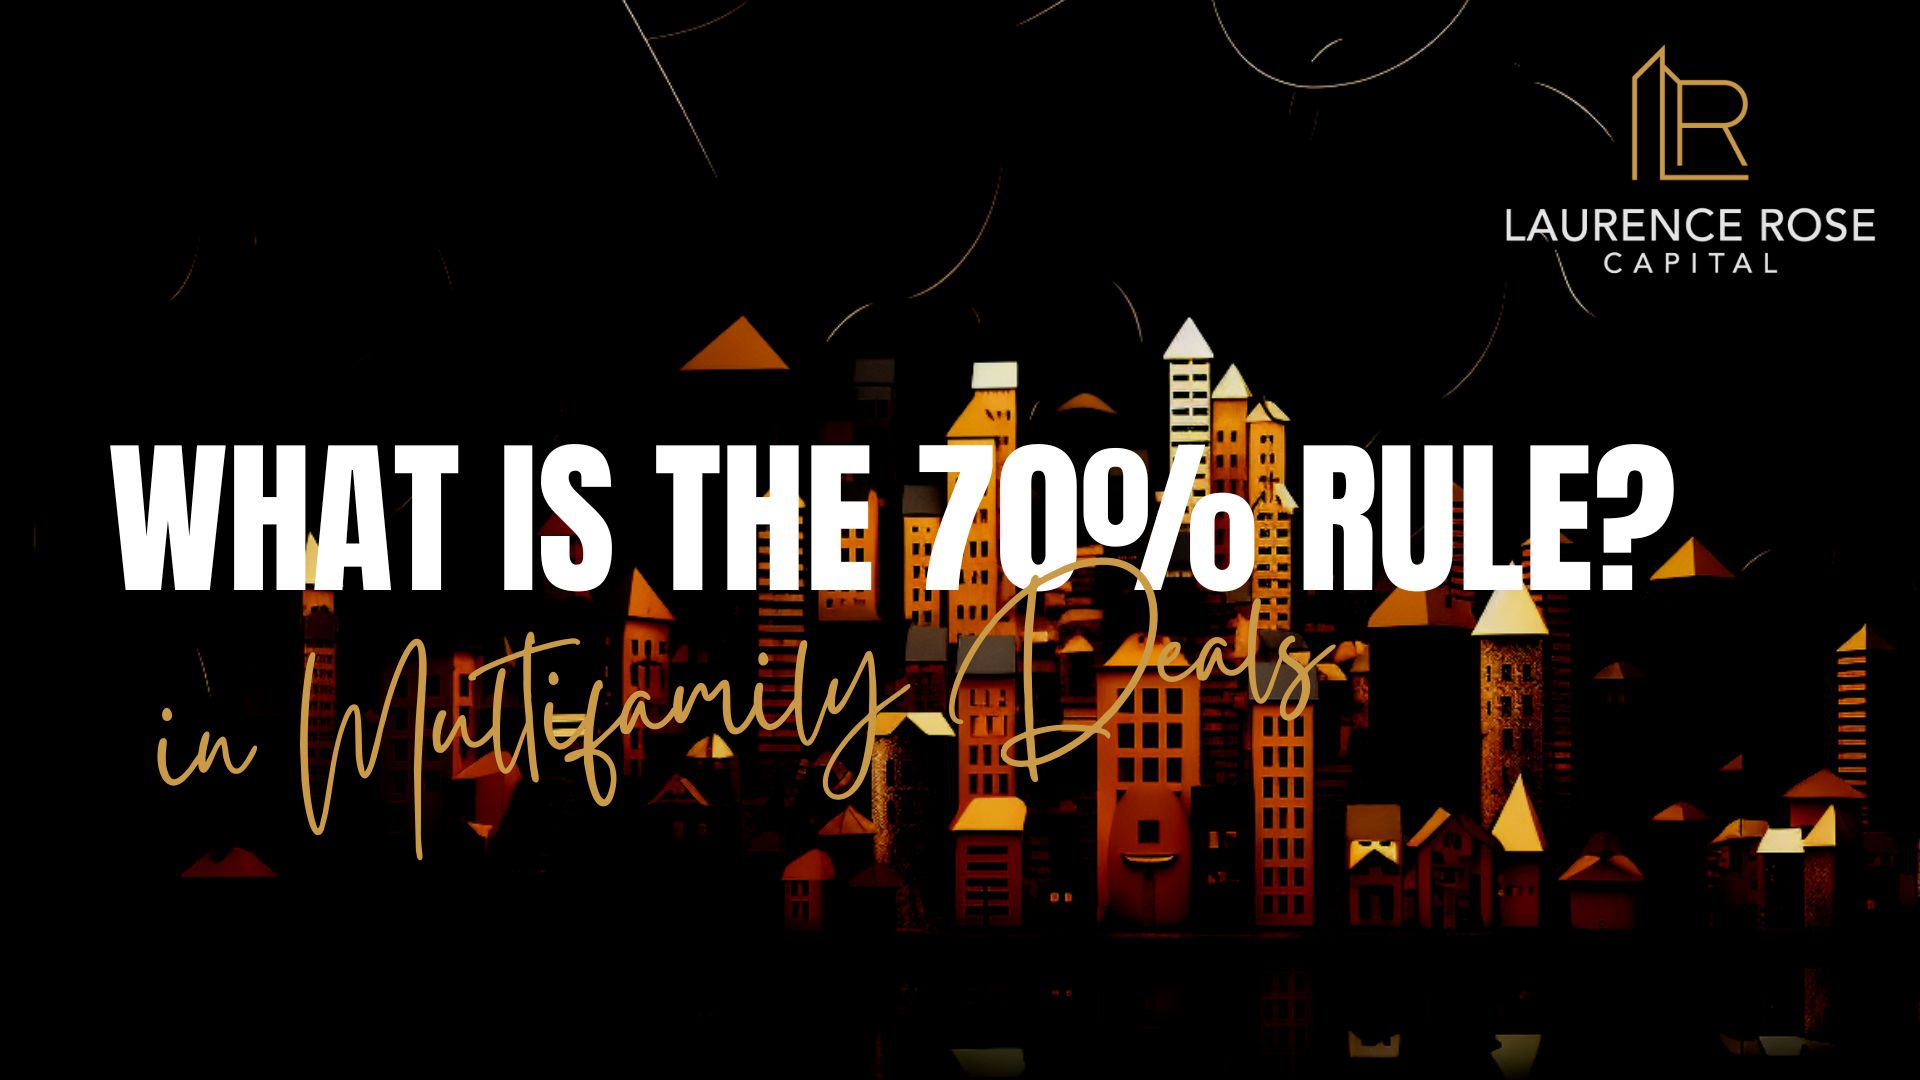 What is the 70% rule?